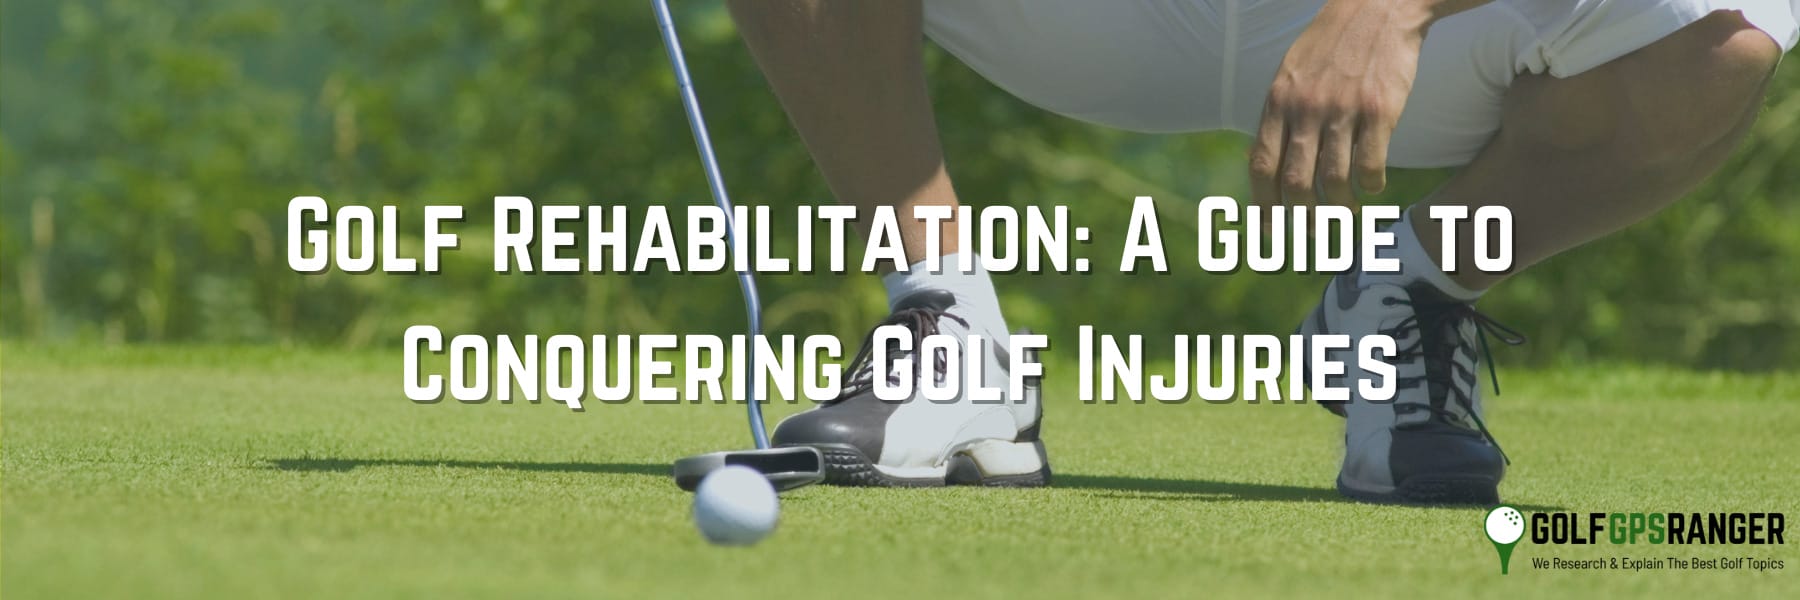 Golf Rehabilitation A Guide to Conquering Golf Injuries